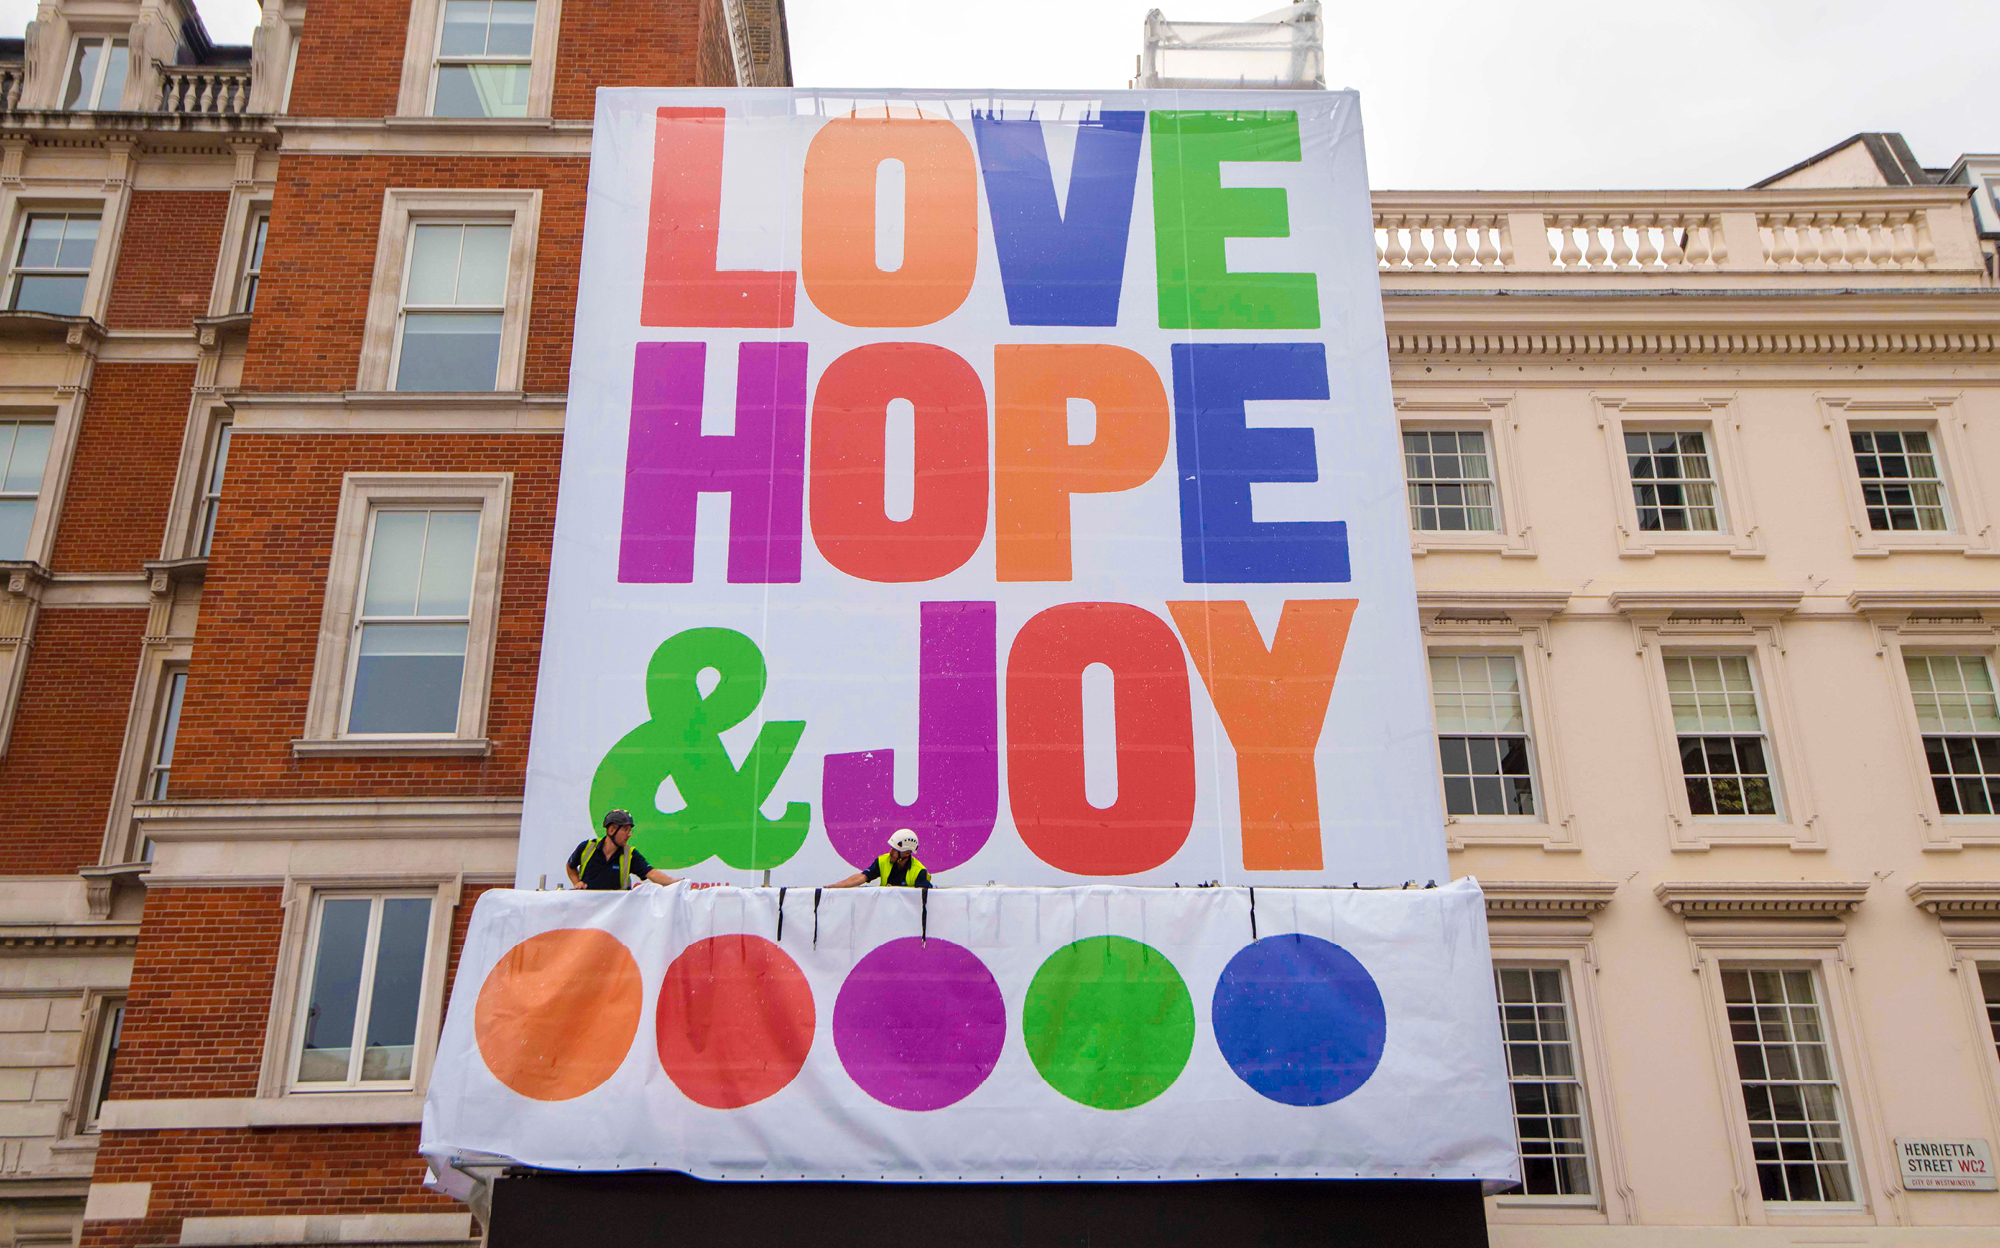 Anthony Burrill's Love, Hope & Joy on display in Covent Garden piazza